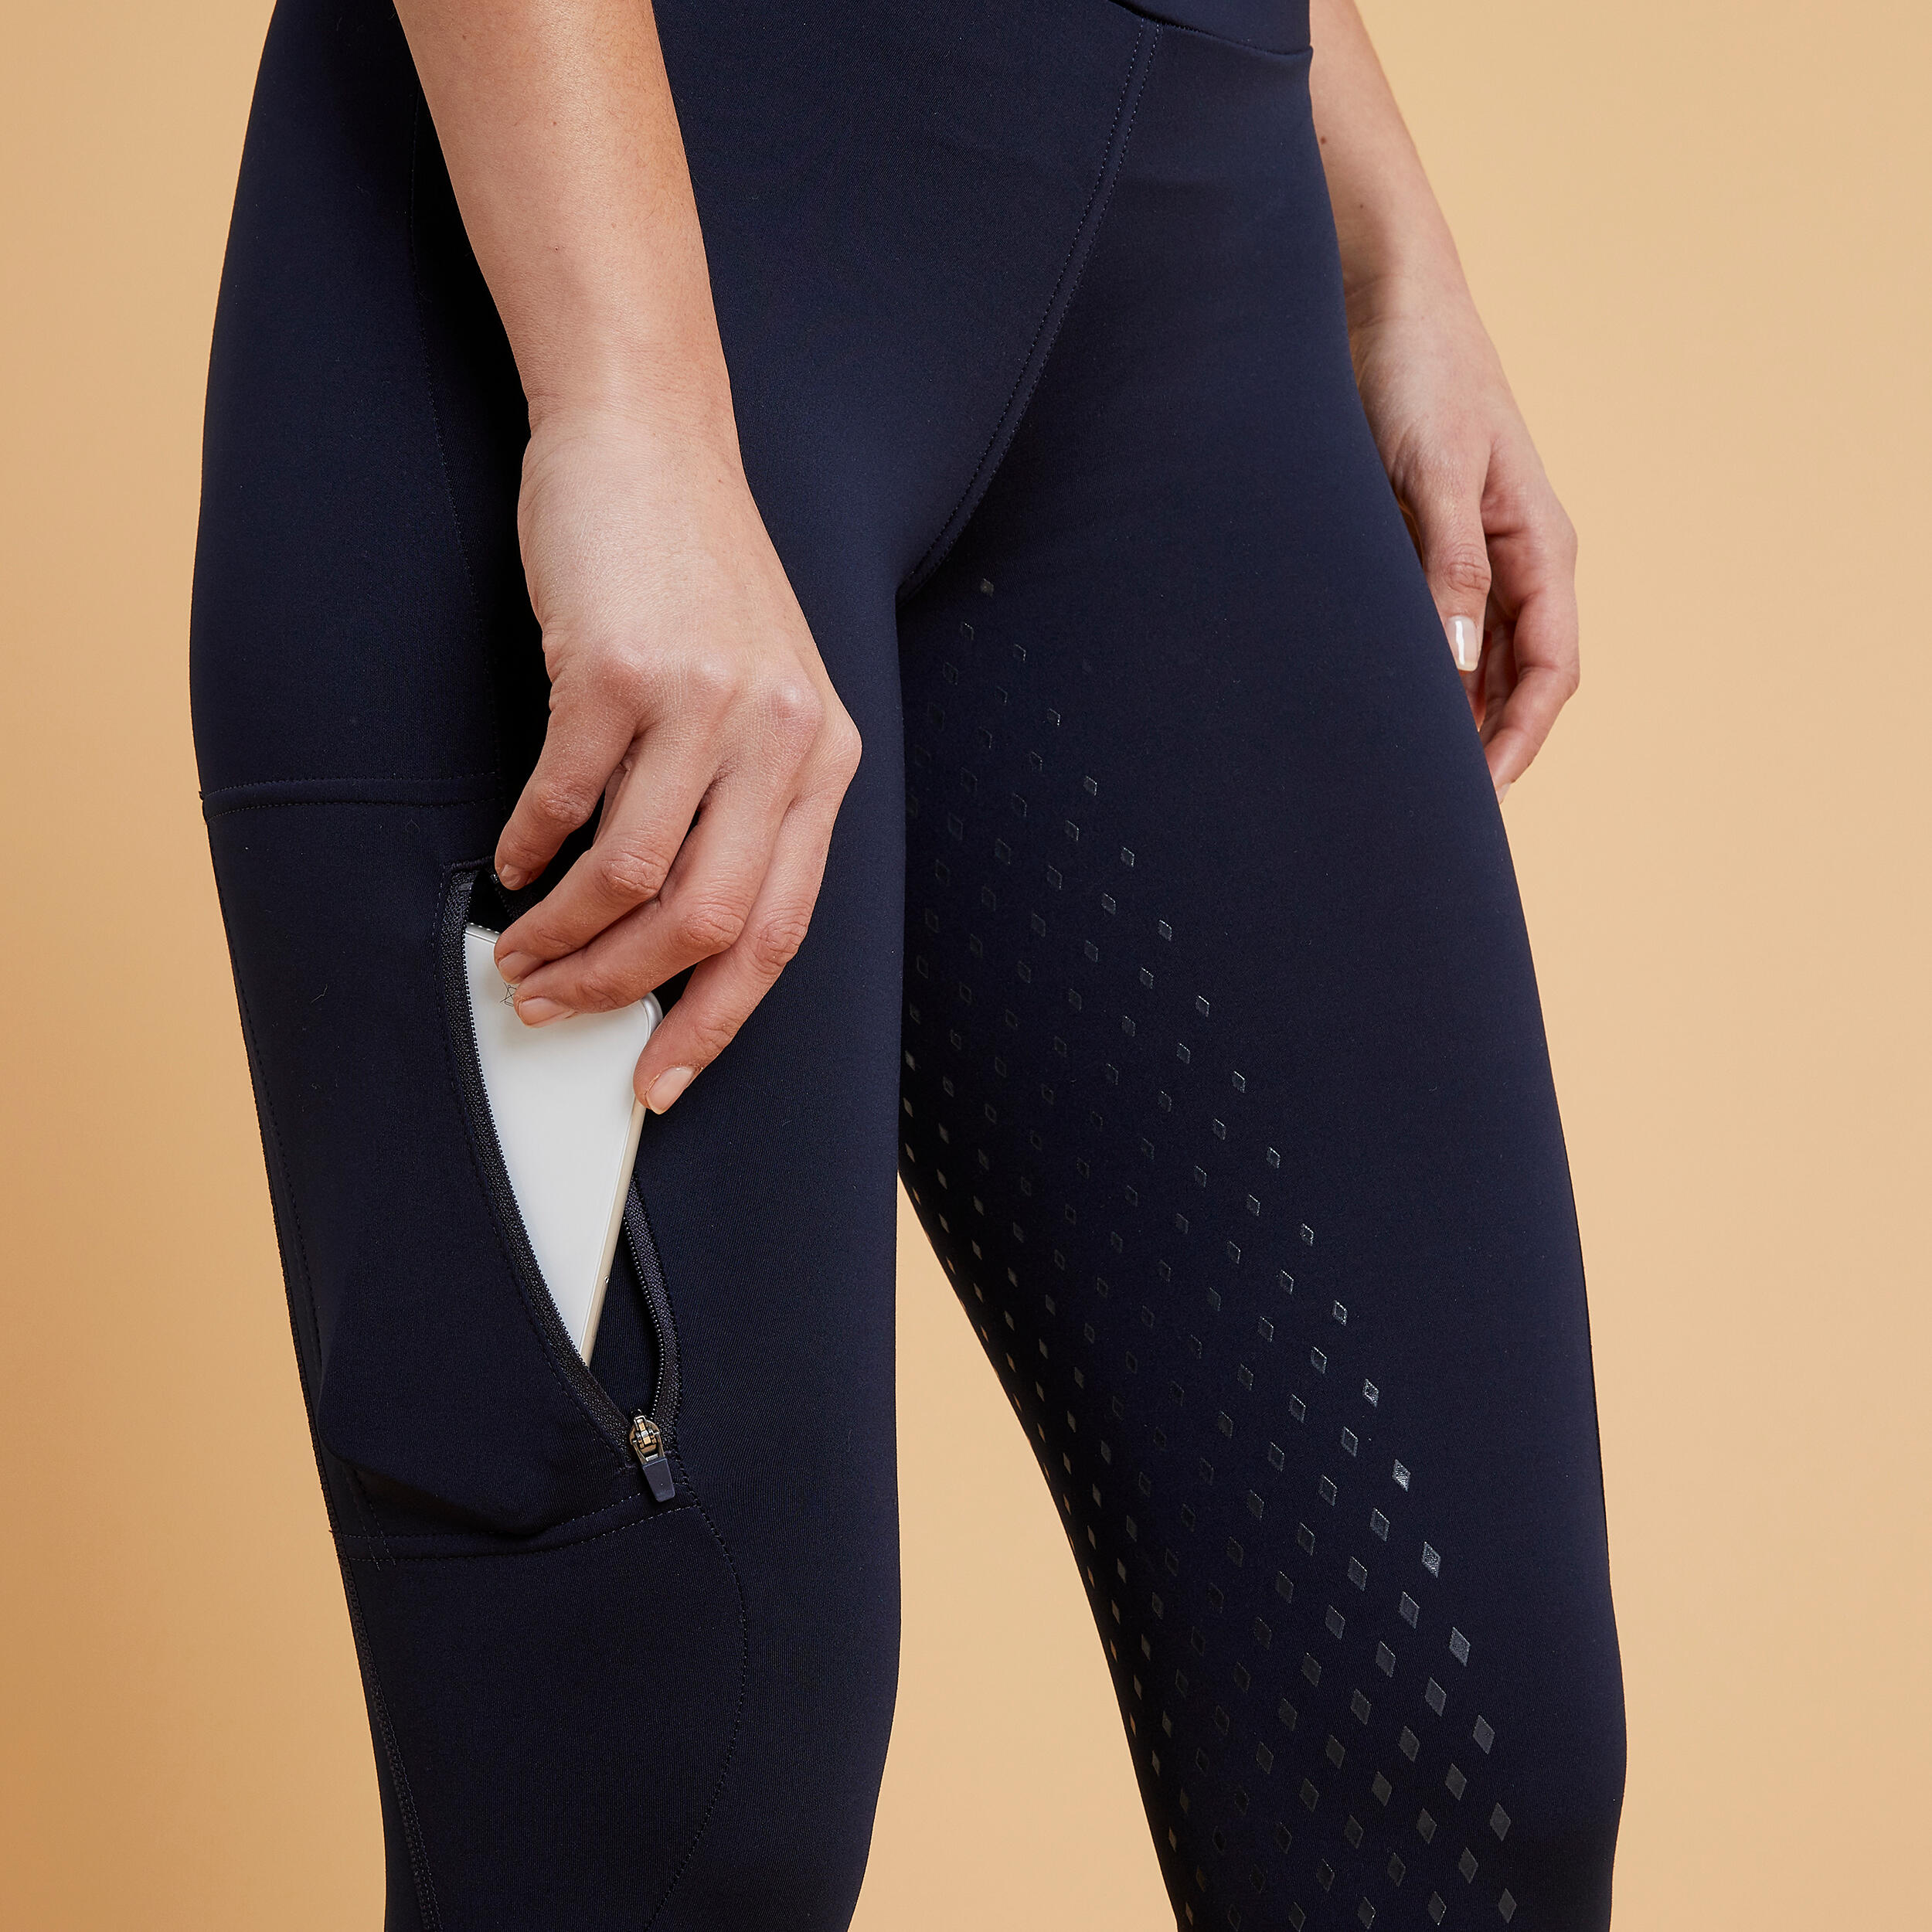 Horse Riding Tights/Leggings Full Seat & phone pockets-5 colours